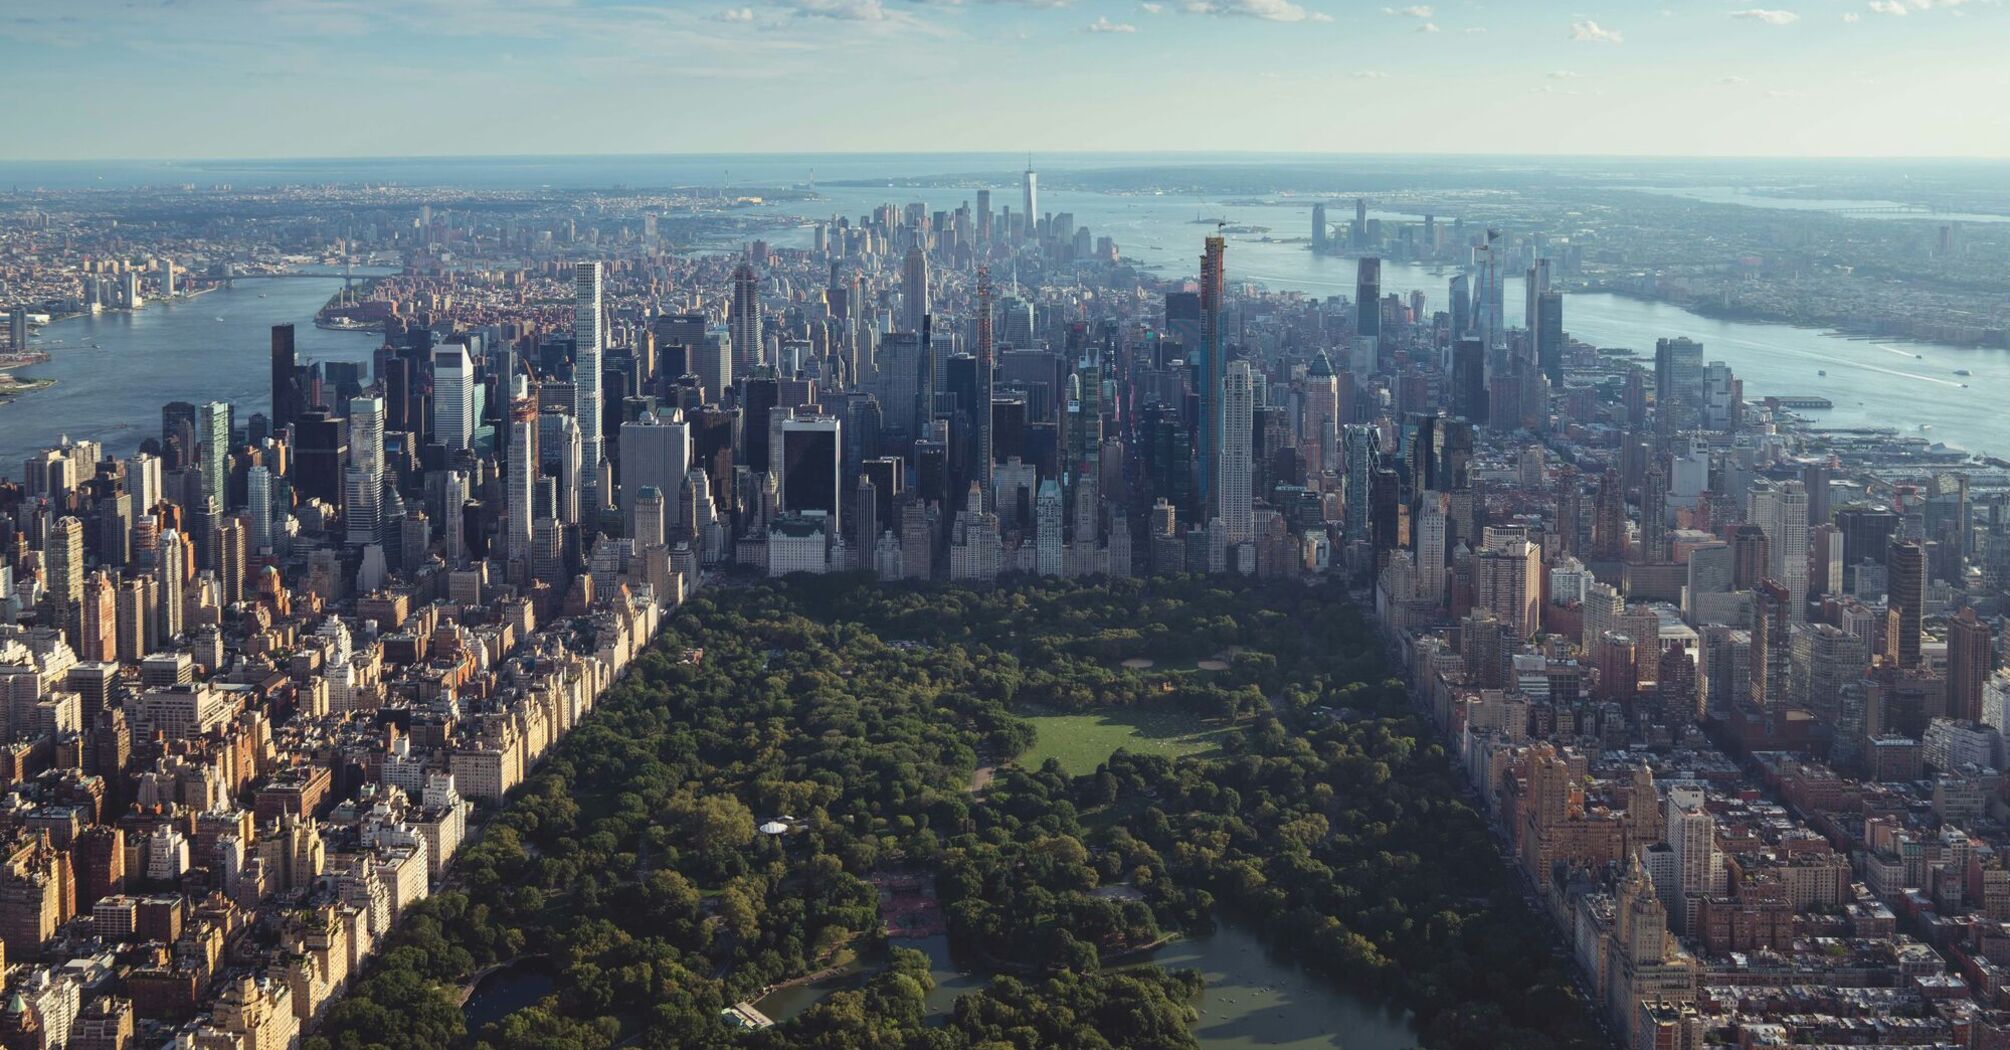 Aerial view of Central Park surrounded by Manhattan skyscrapers in New York City